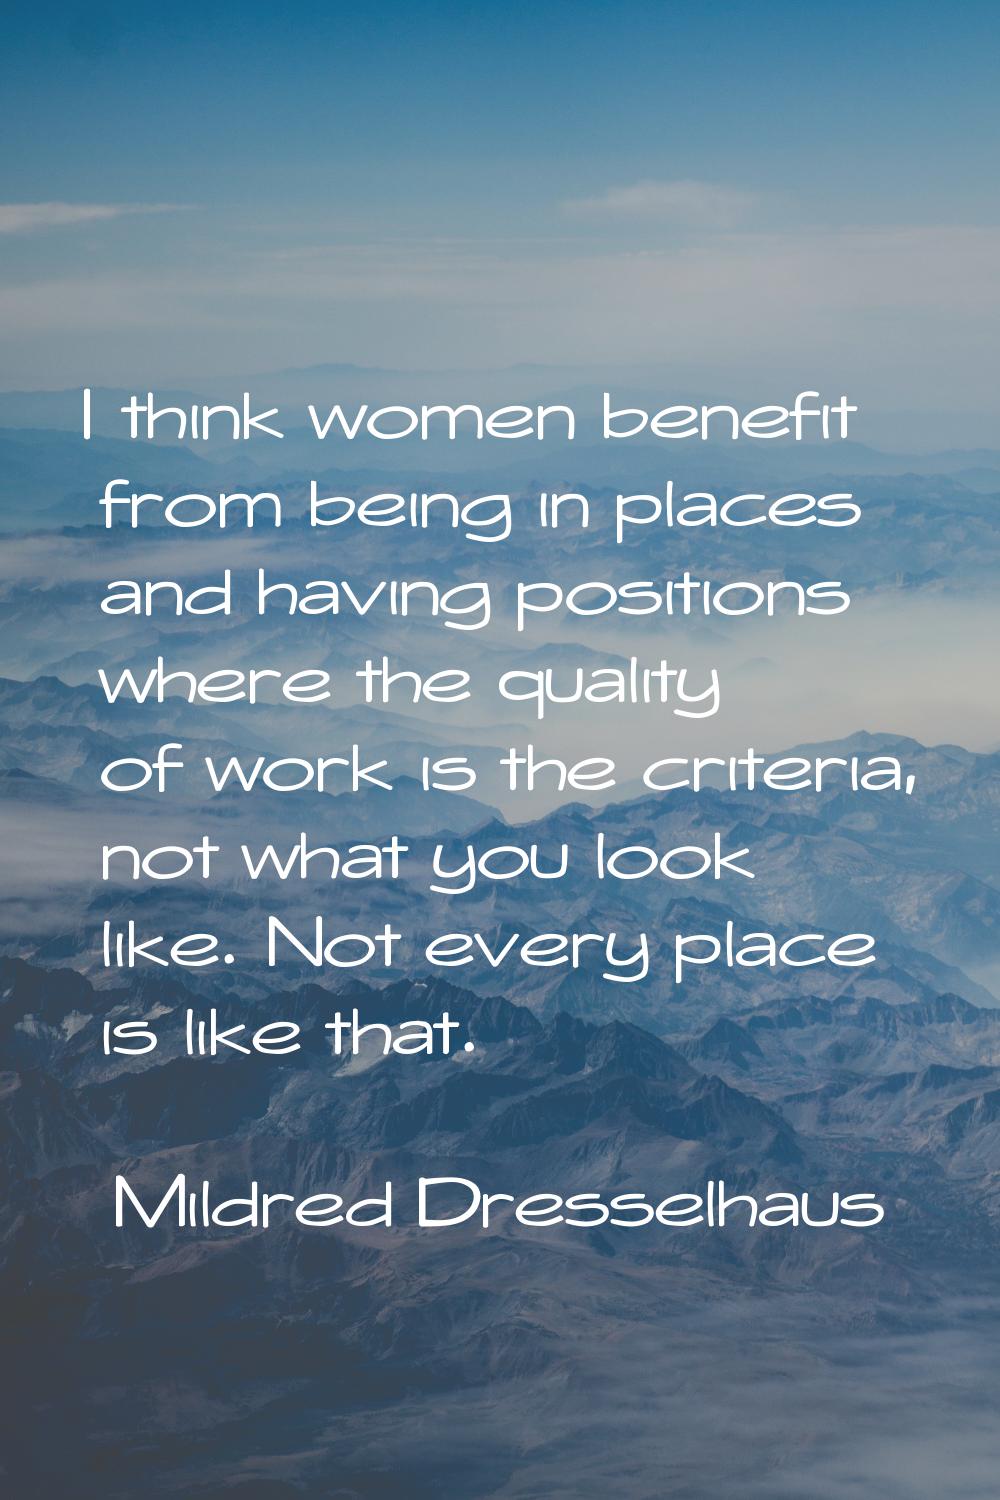 I think women benefit from being in places and having positions where the quality of work is the cr